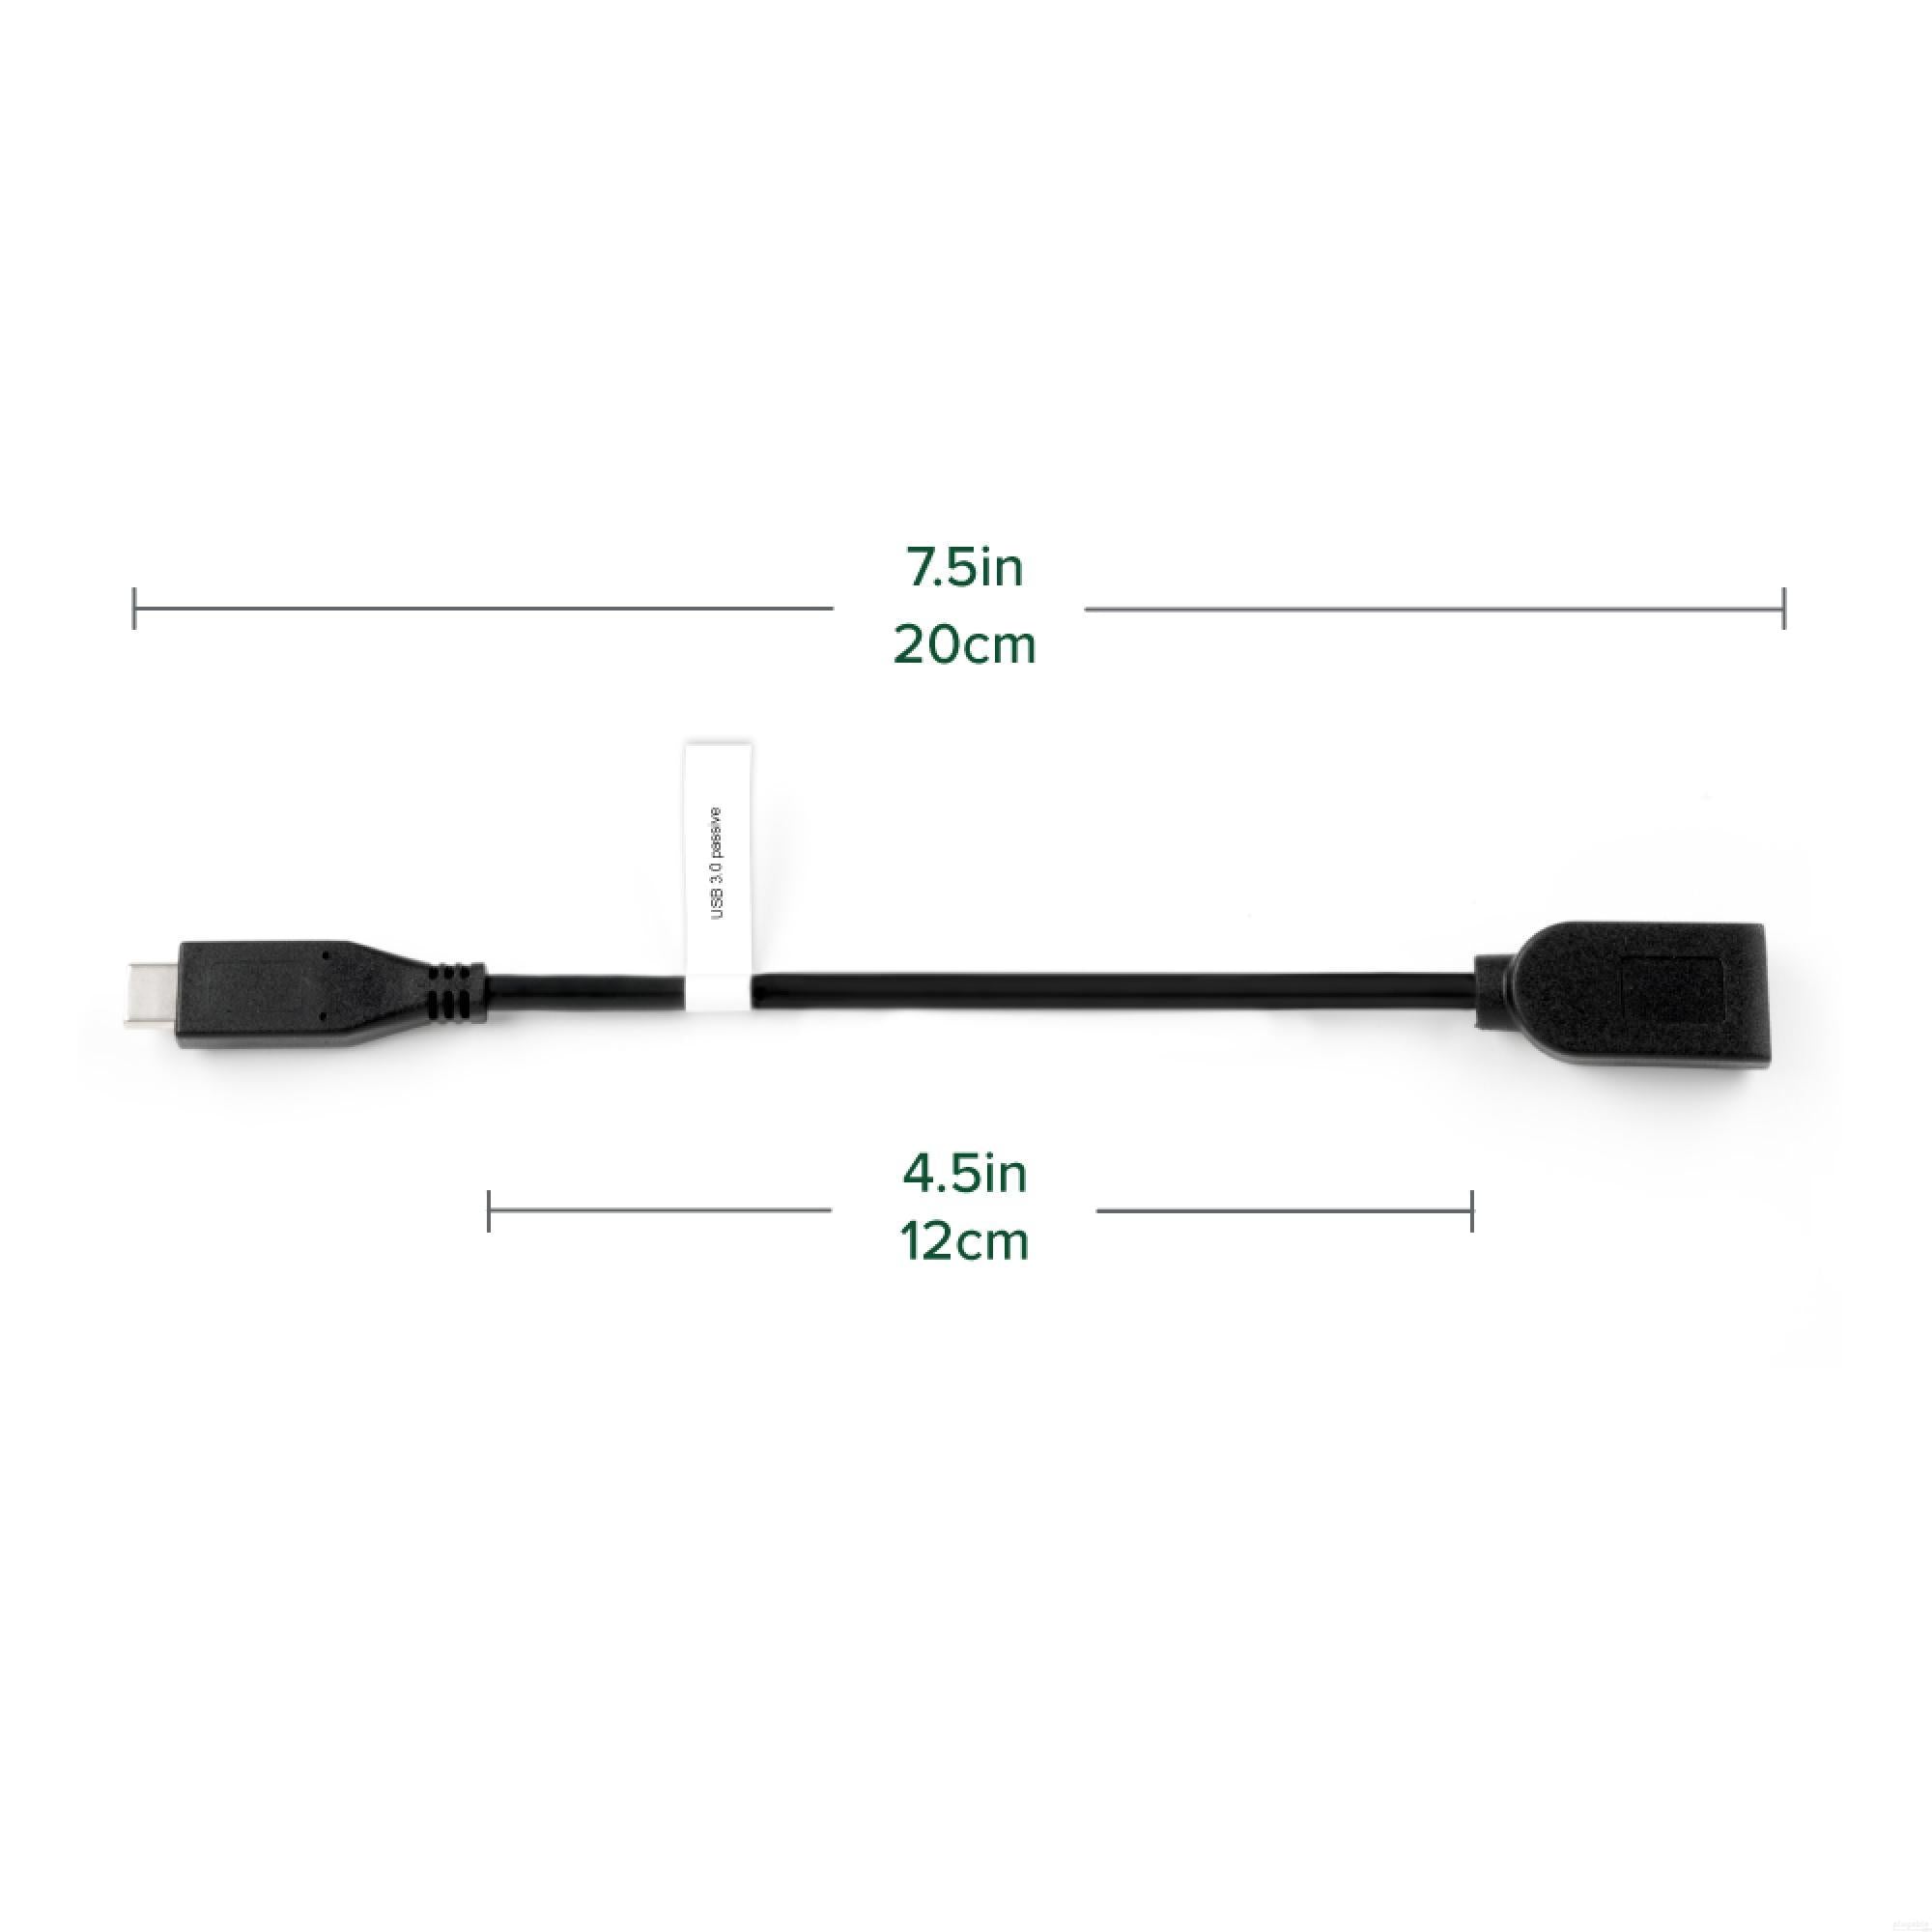 USB-C Cable, USB 3.0 Type C to Type A